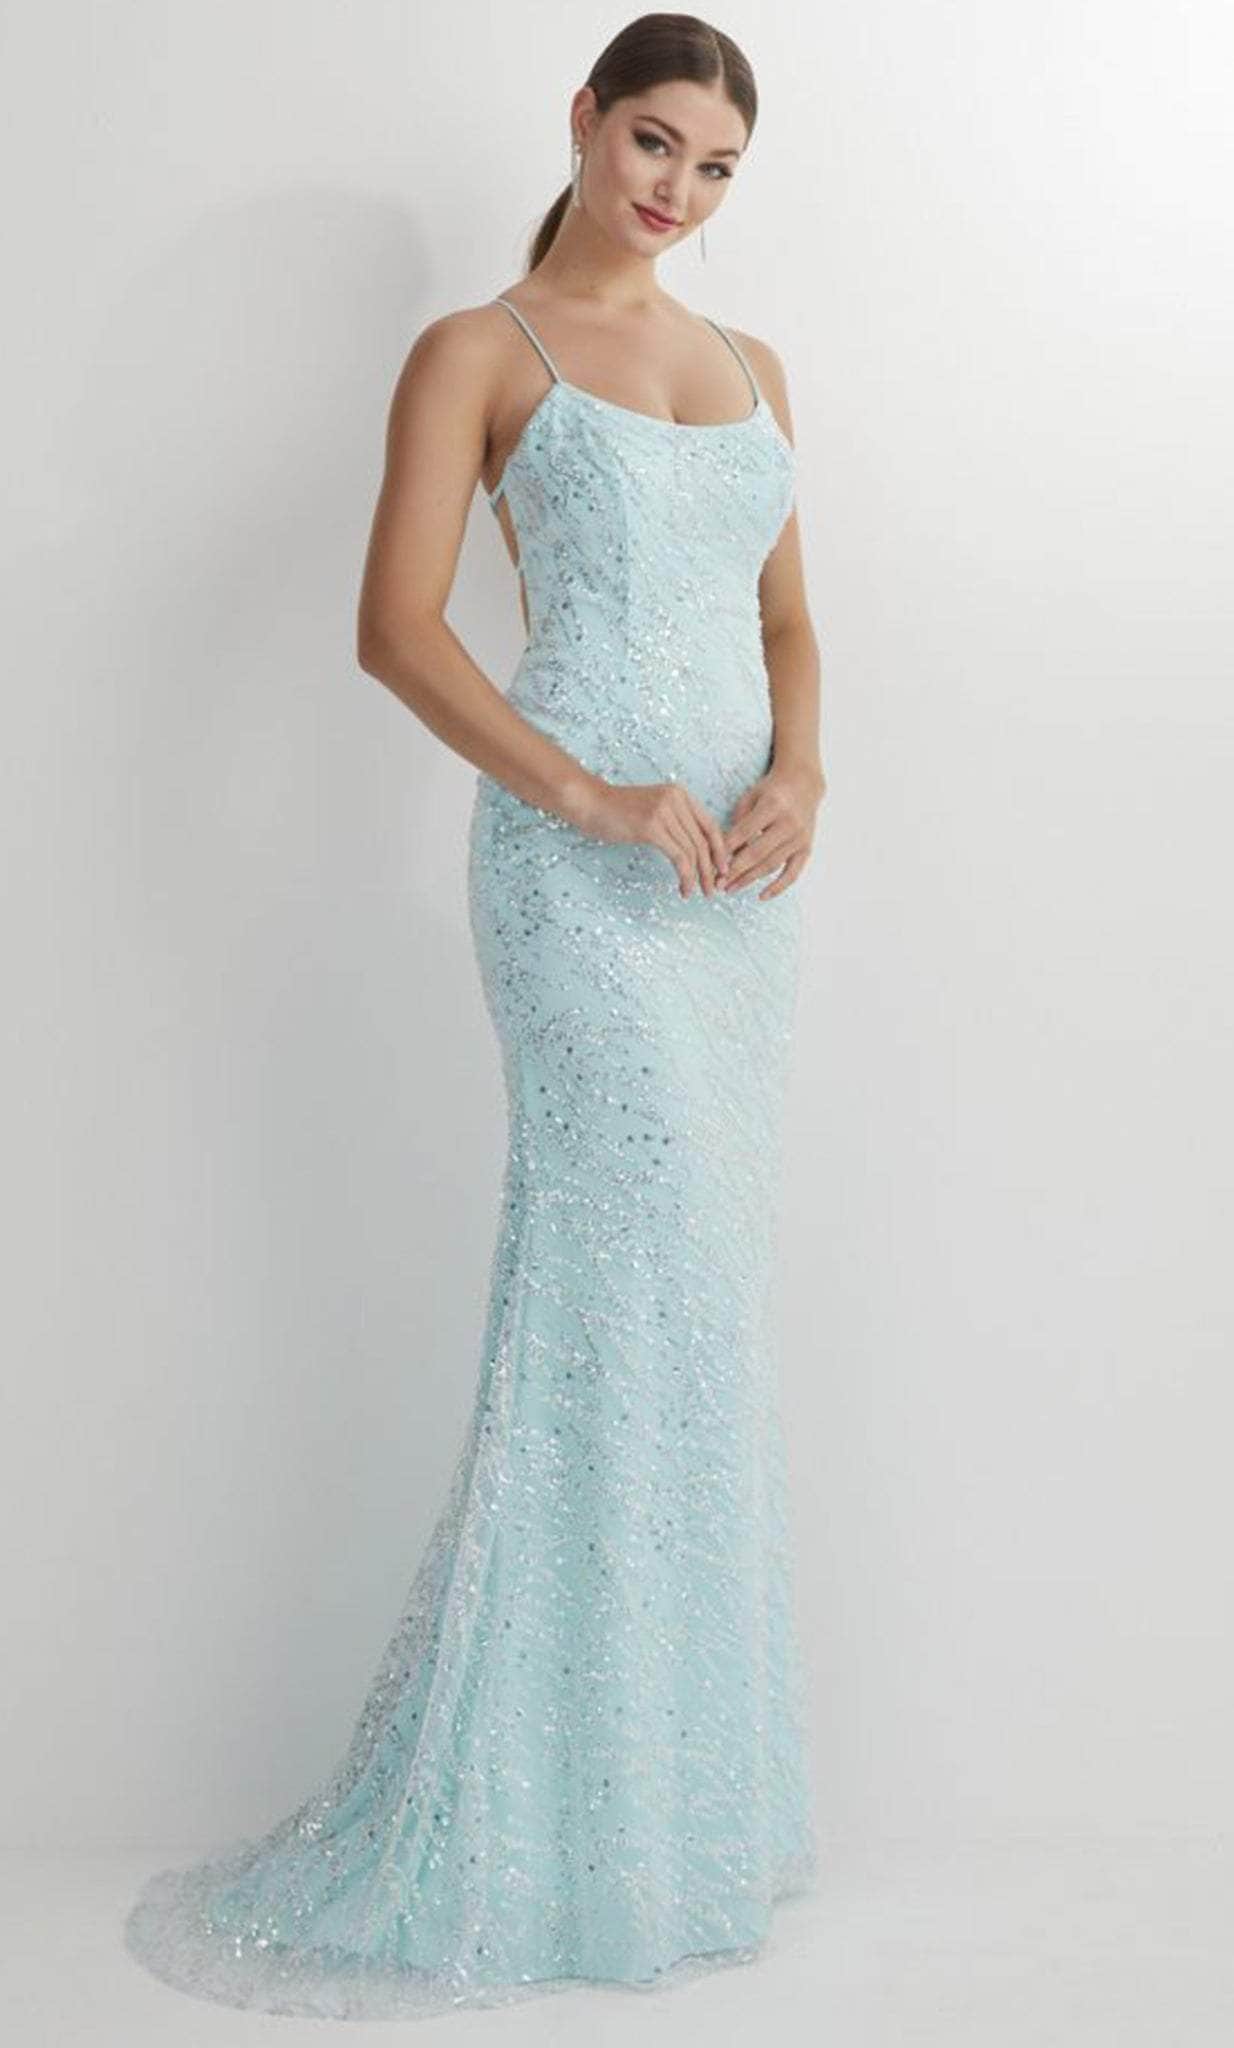 Studio 17 Prom 12893 - Scoop Neck Lace-Up Back Prom Gown
